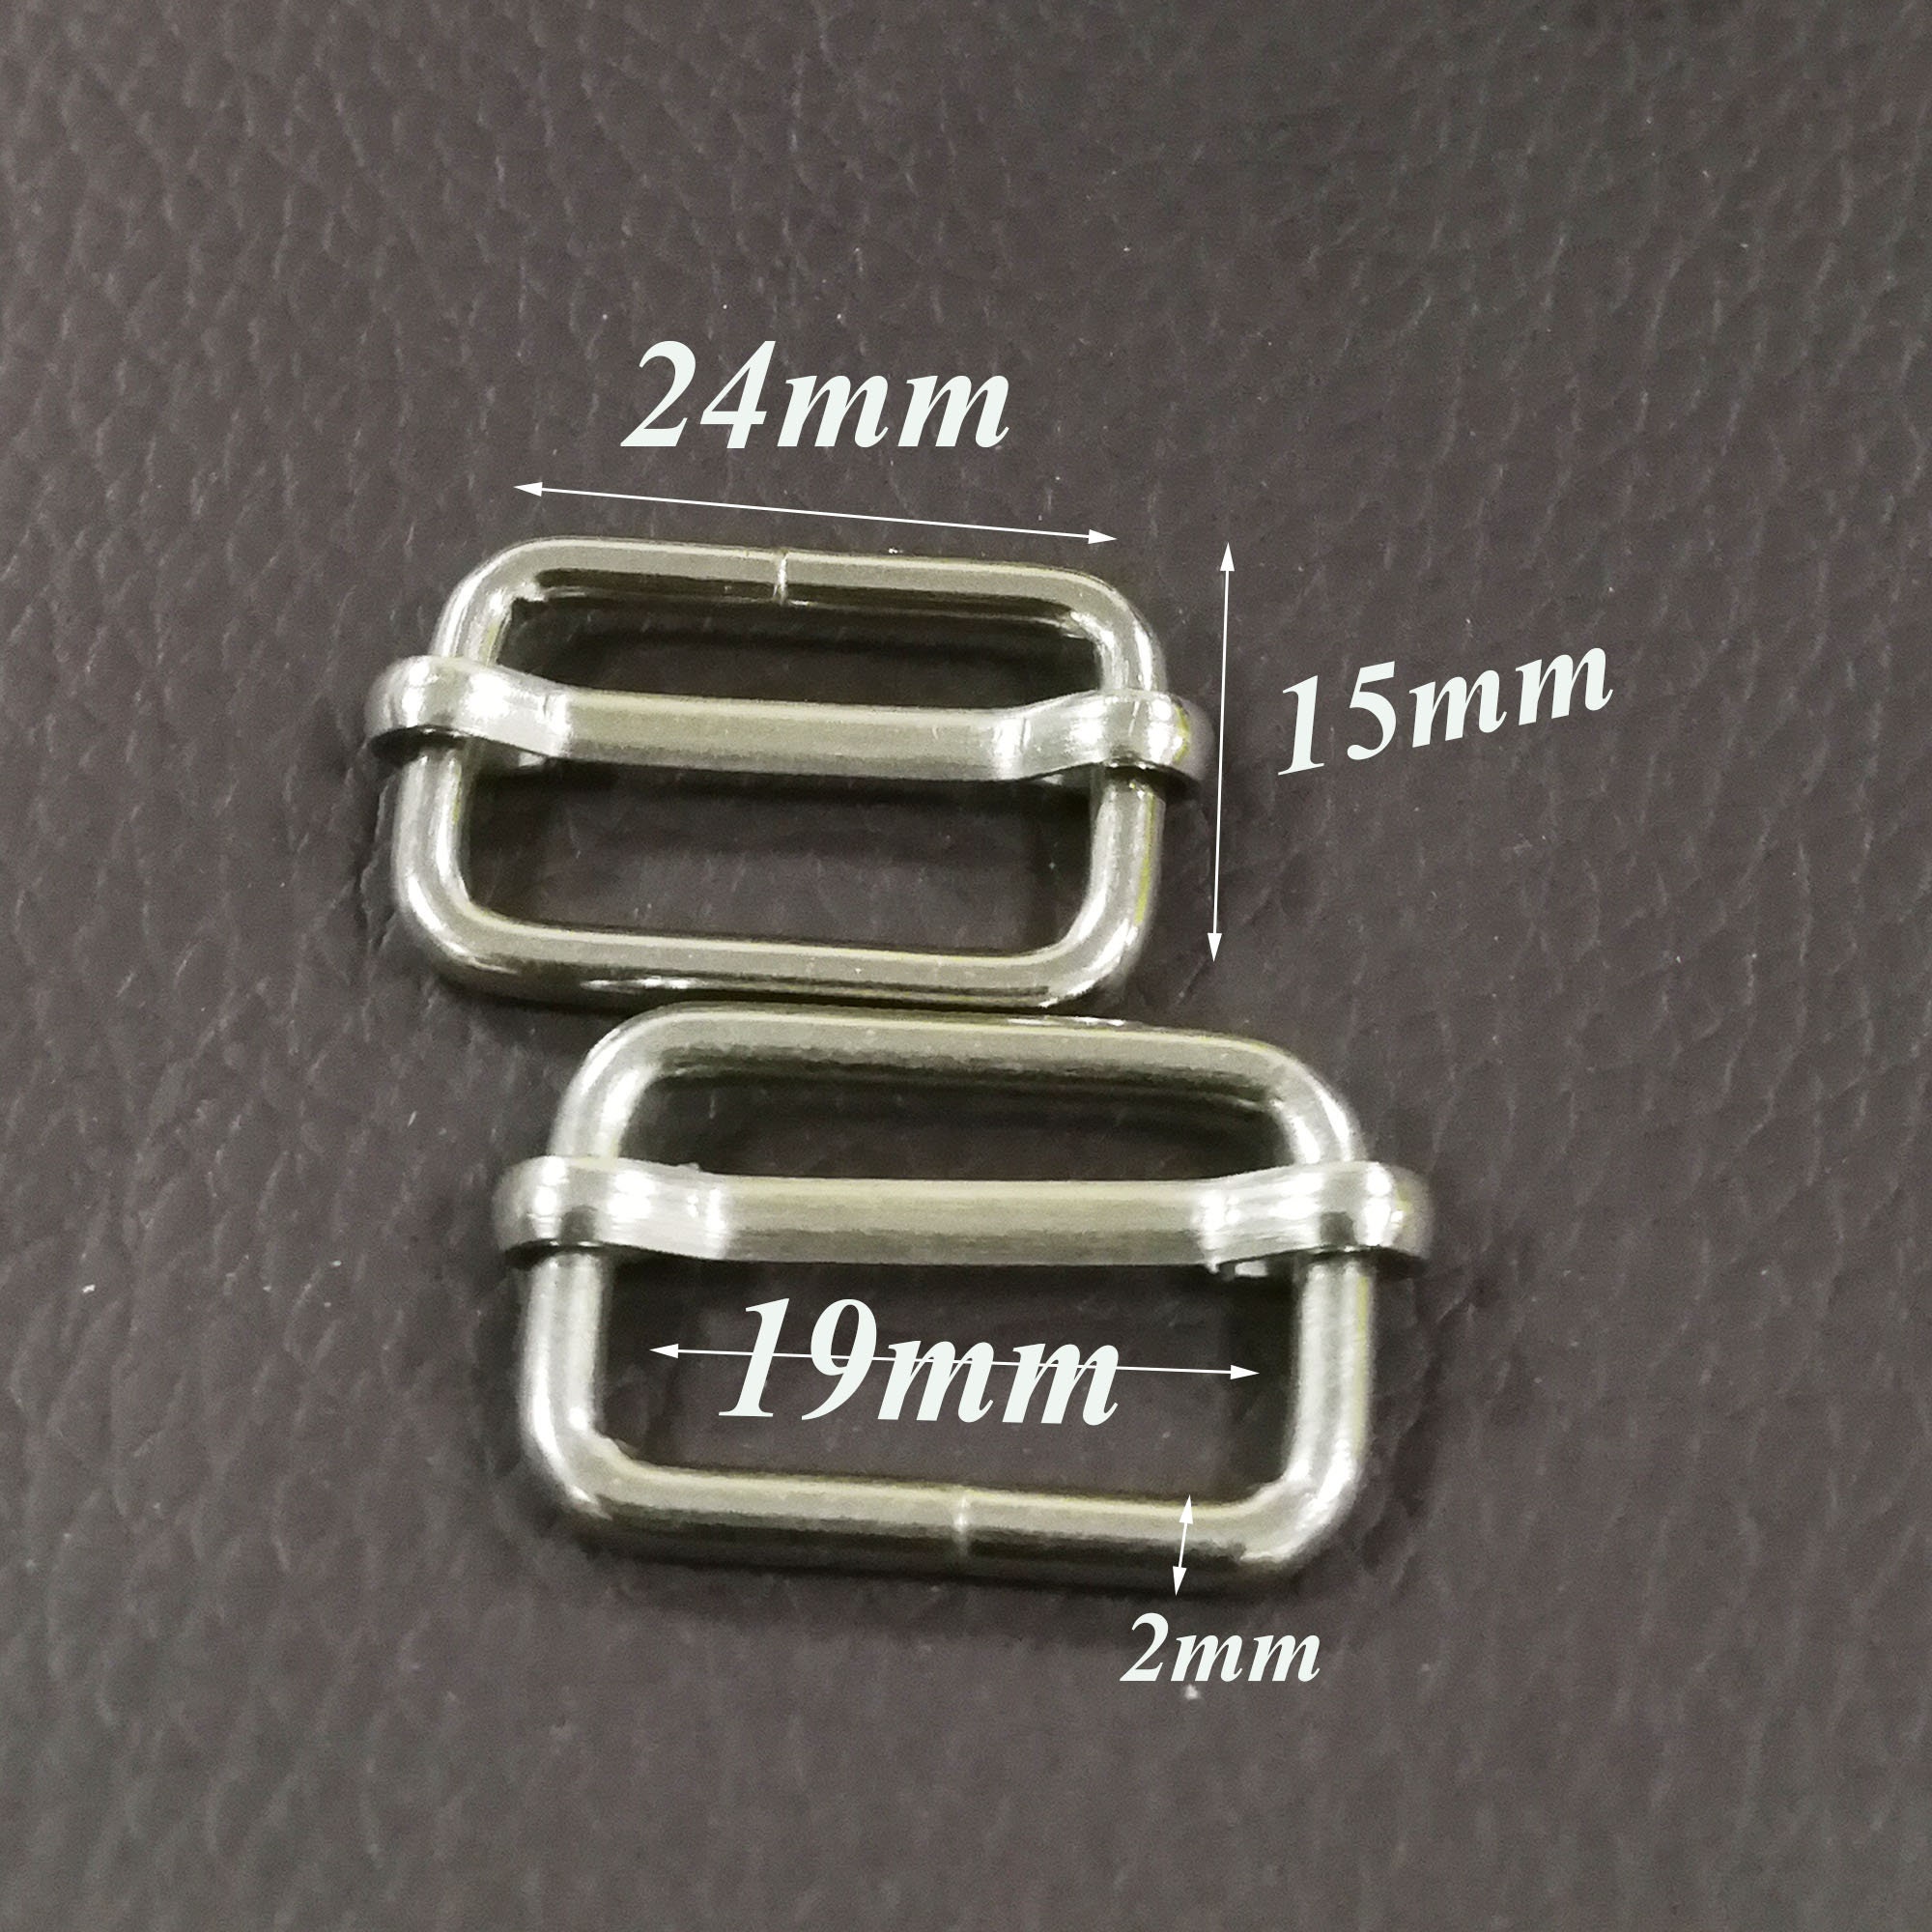 38mm / 1.5 Metal Dungaree Buckles, Clips, Fasteners With Slider in SILVER  Colour Metal, Suitable for 1 Straps, Aprons Overalls Workwear 